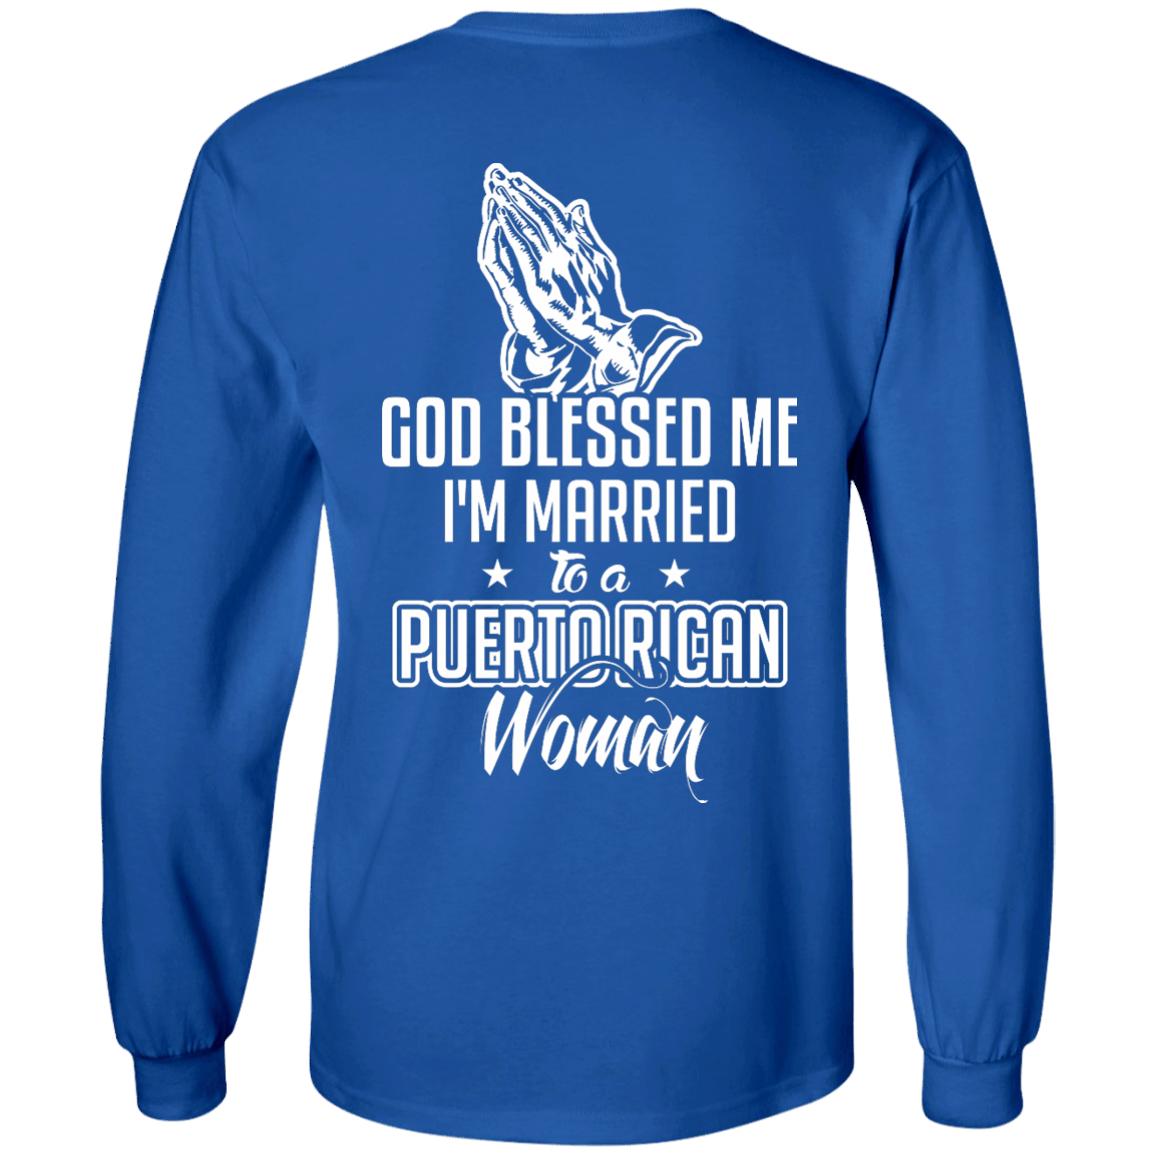 Long Sleeve - Married & Blessed - Long Sleeve